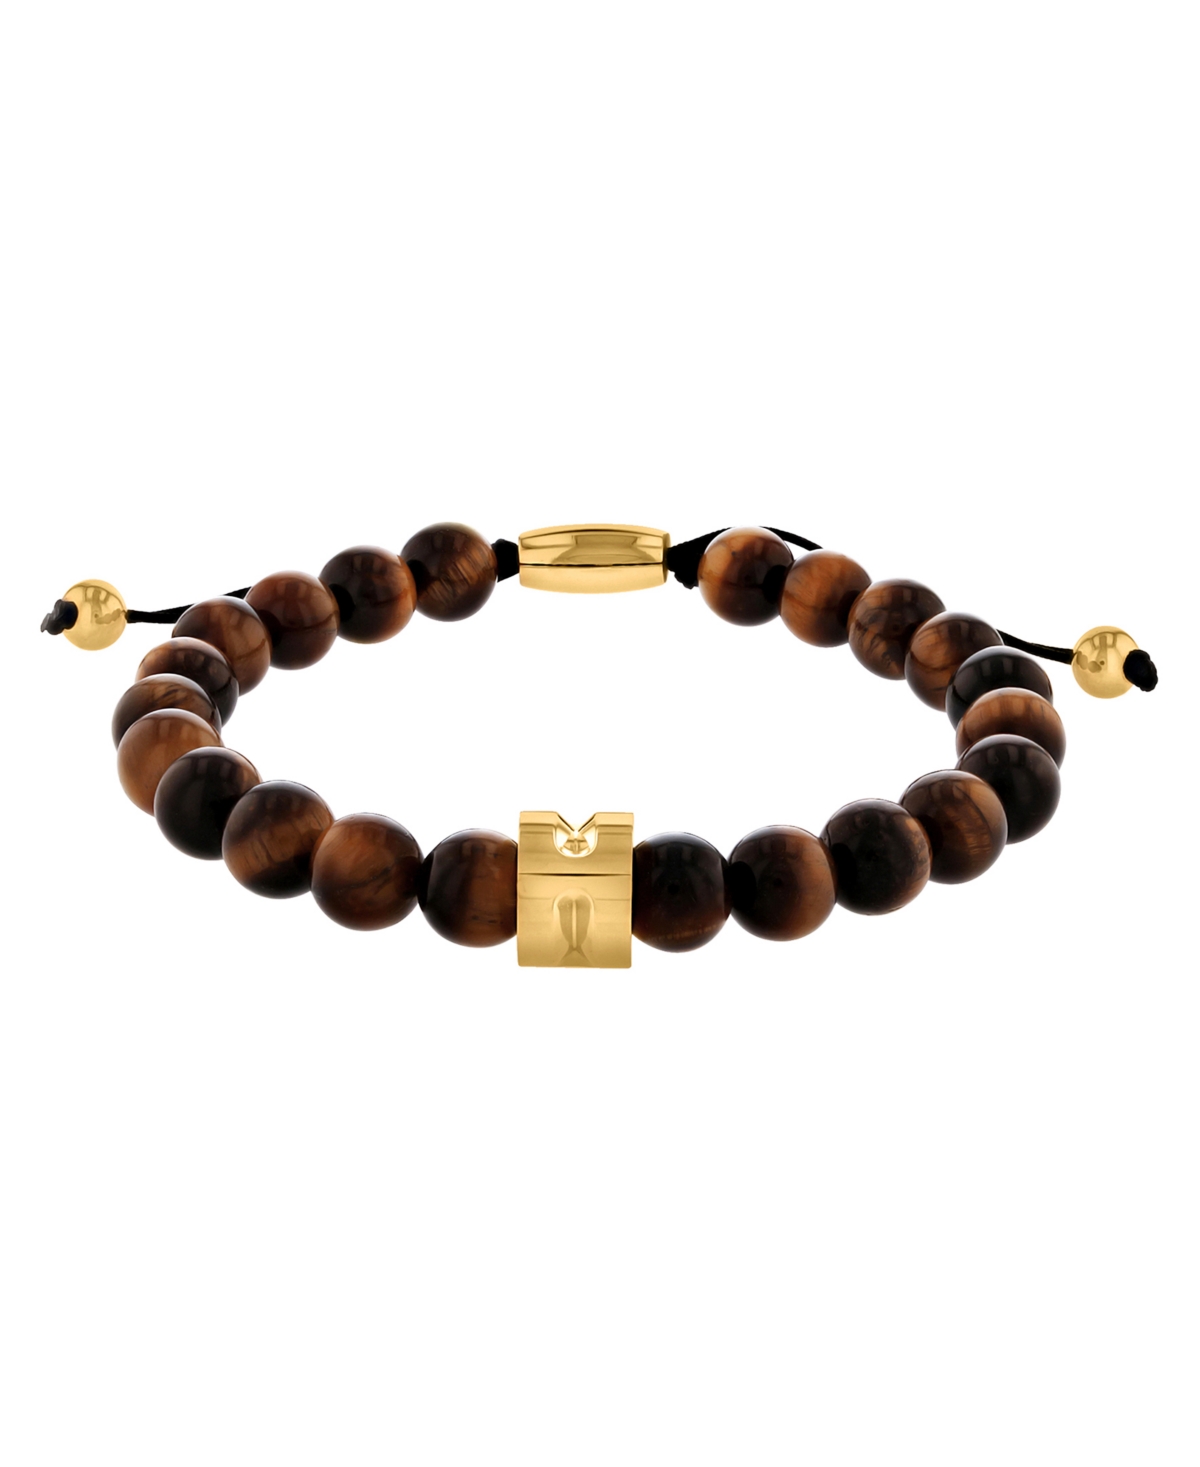 C & c Jewelry Macy's Men's Tiger's Eye Bead Bolo Bracelet with Stainless Steel Accents